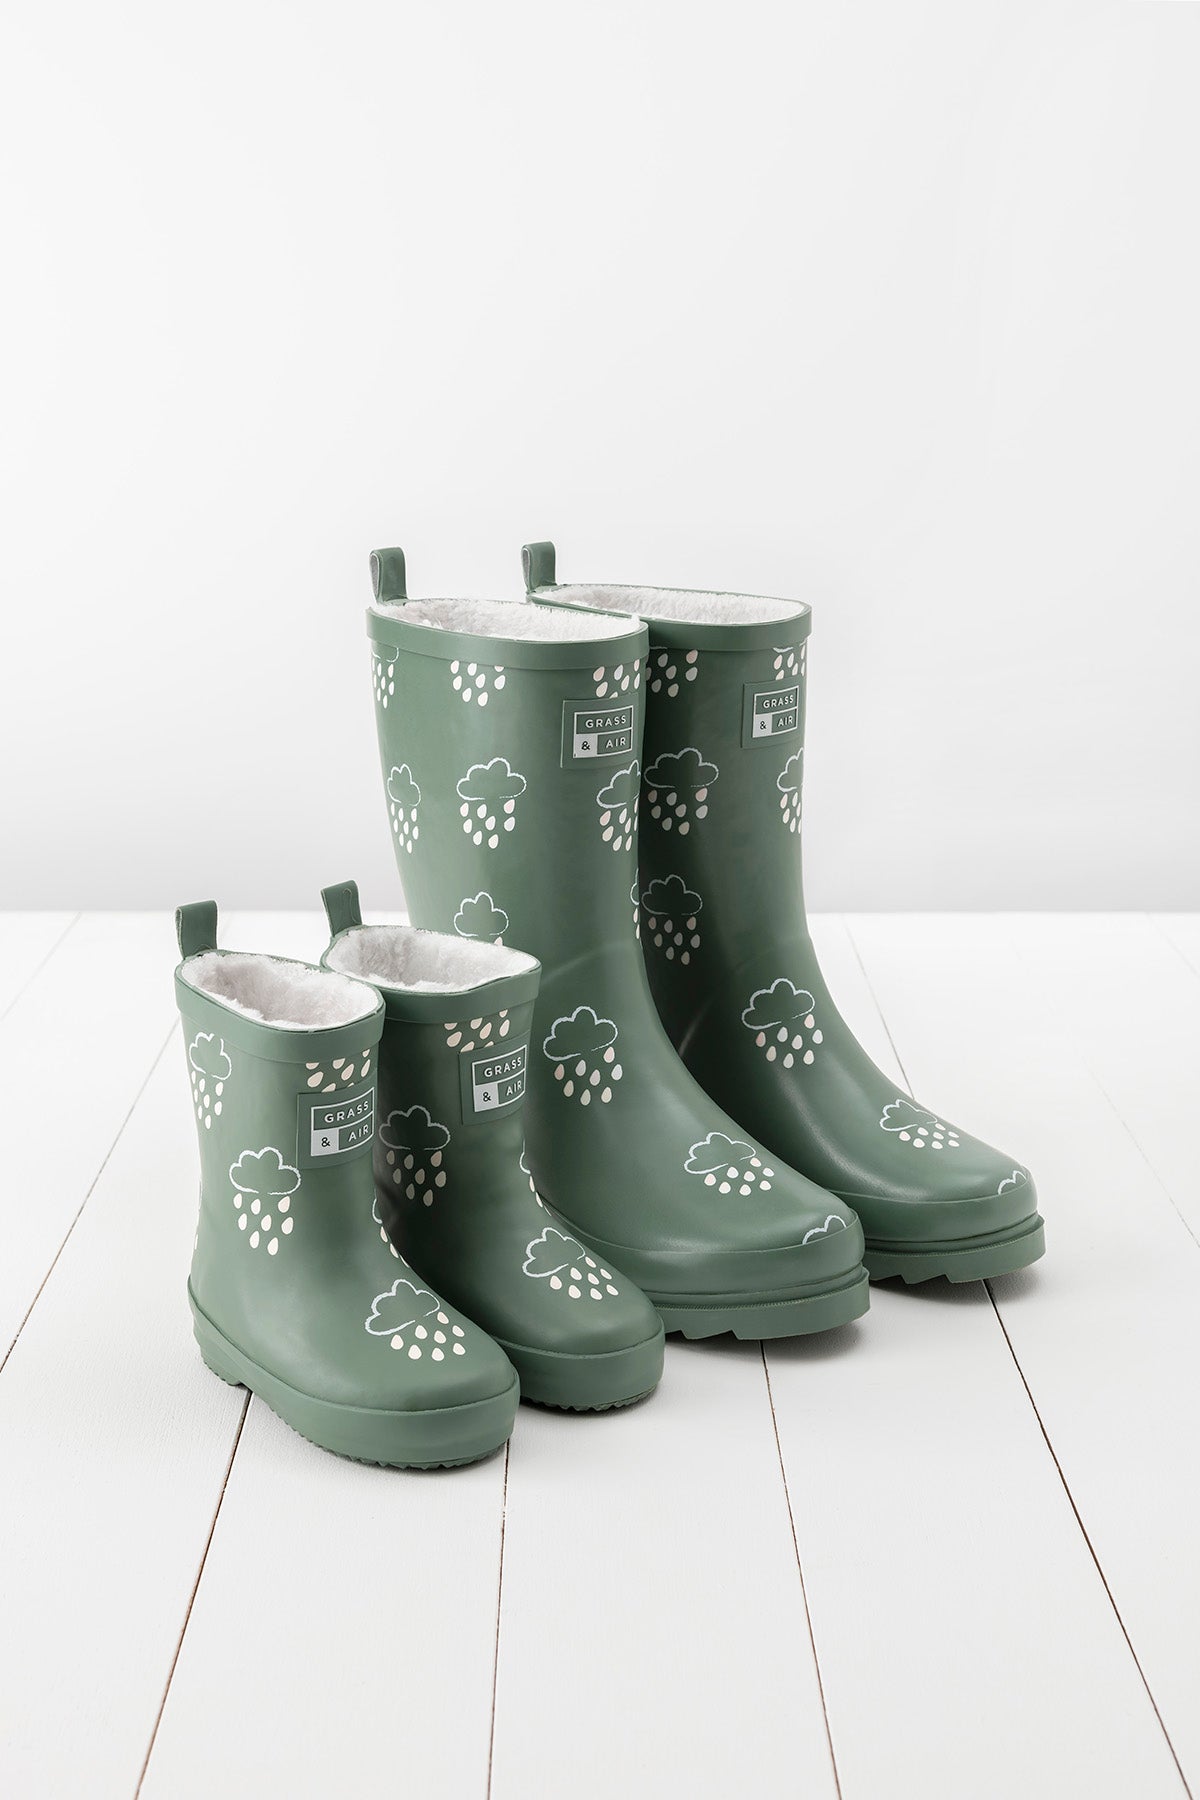 Adult Khaki Green Colour-Changing Wellies